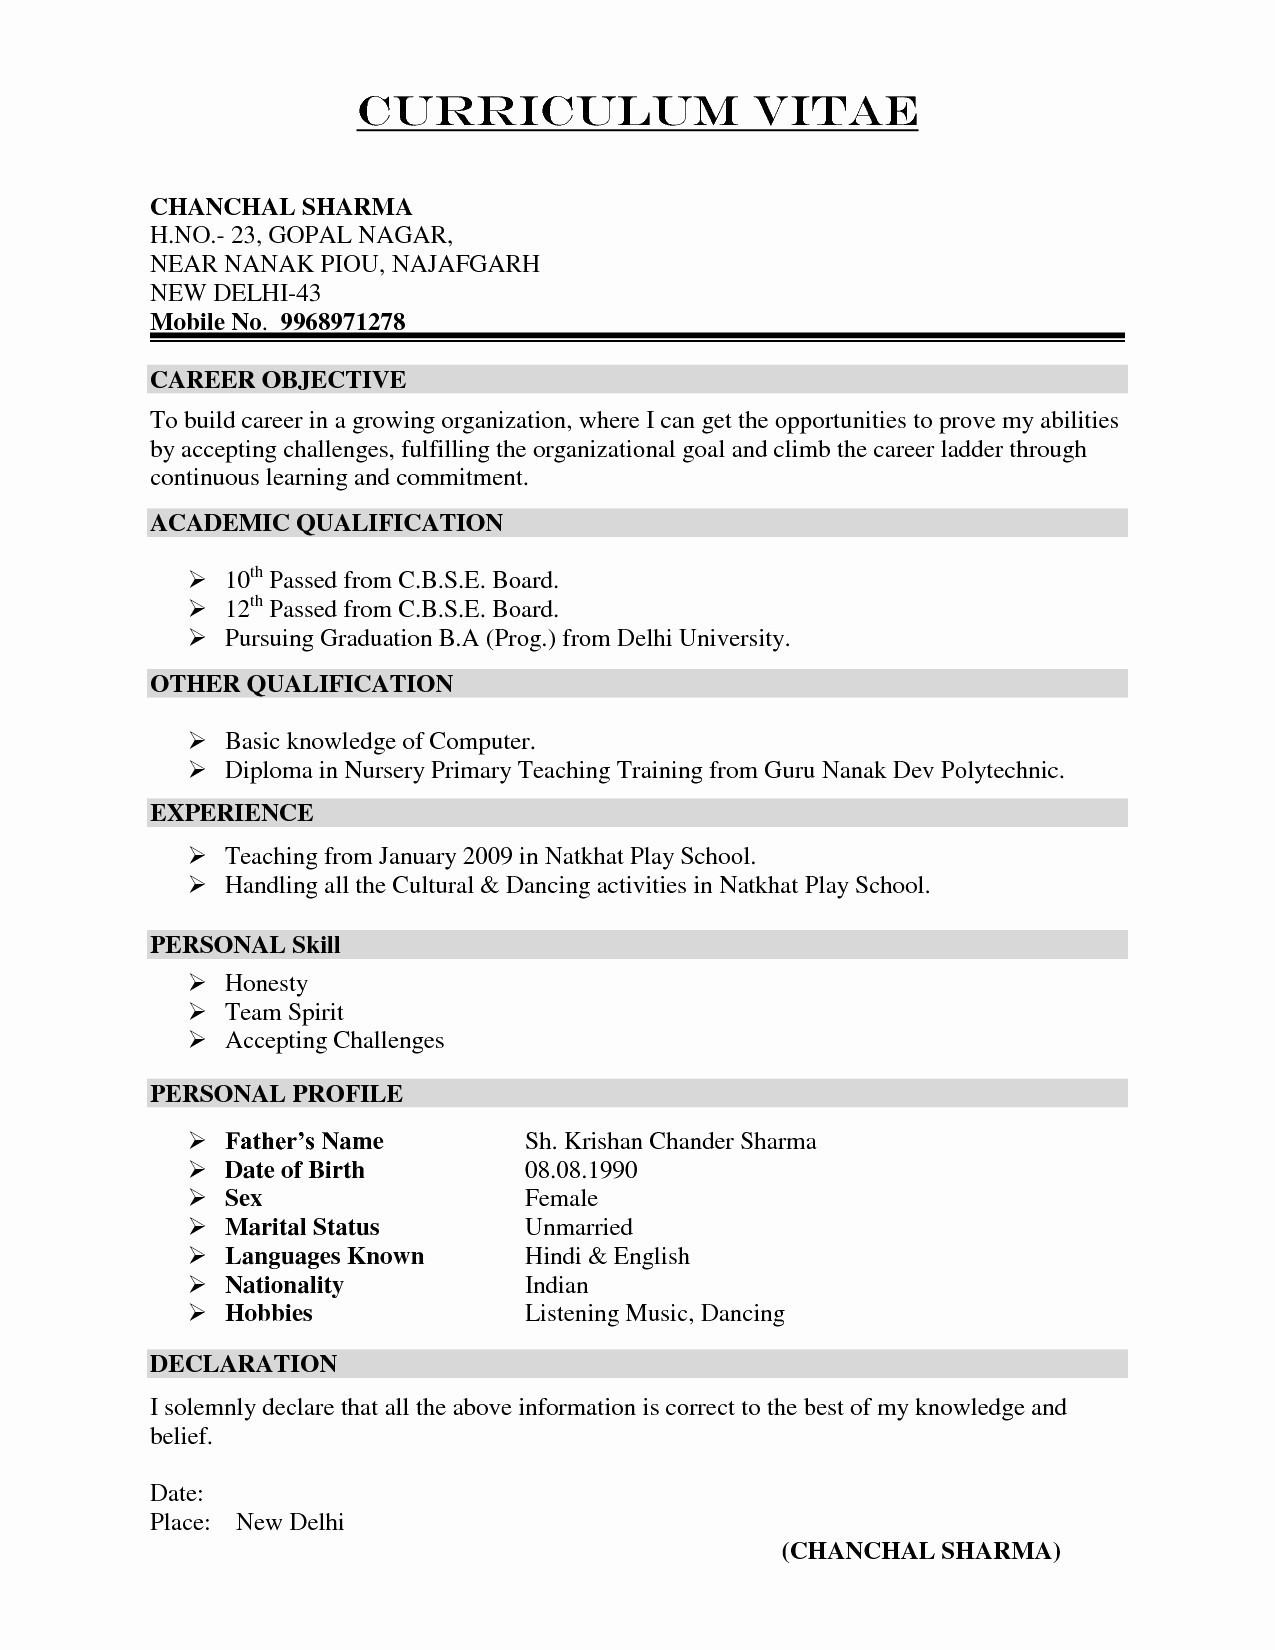 How To Fill Out A Resume How To Fill Out References On A Resume Elegant Resume For Letter Re Mendation Template Examples Of How To Fill Out References On A Resume how to fill out a resume|wikiresume.com